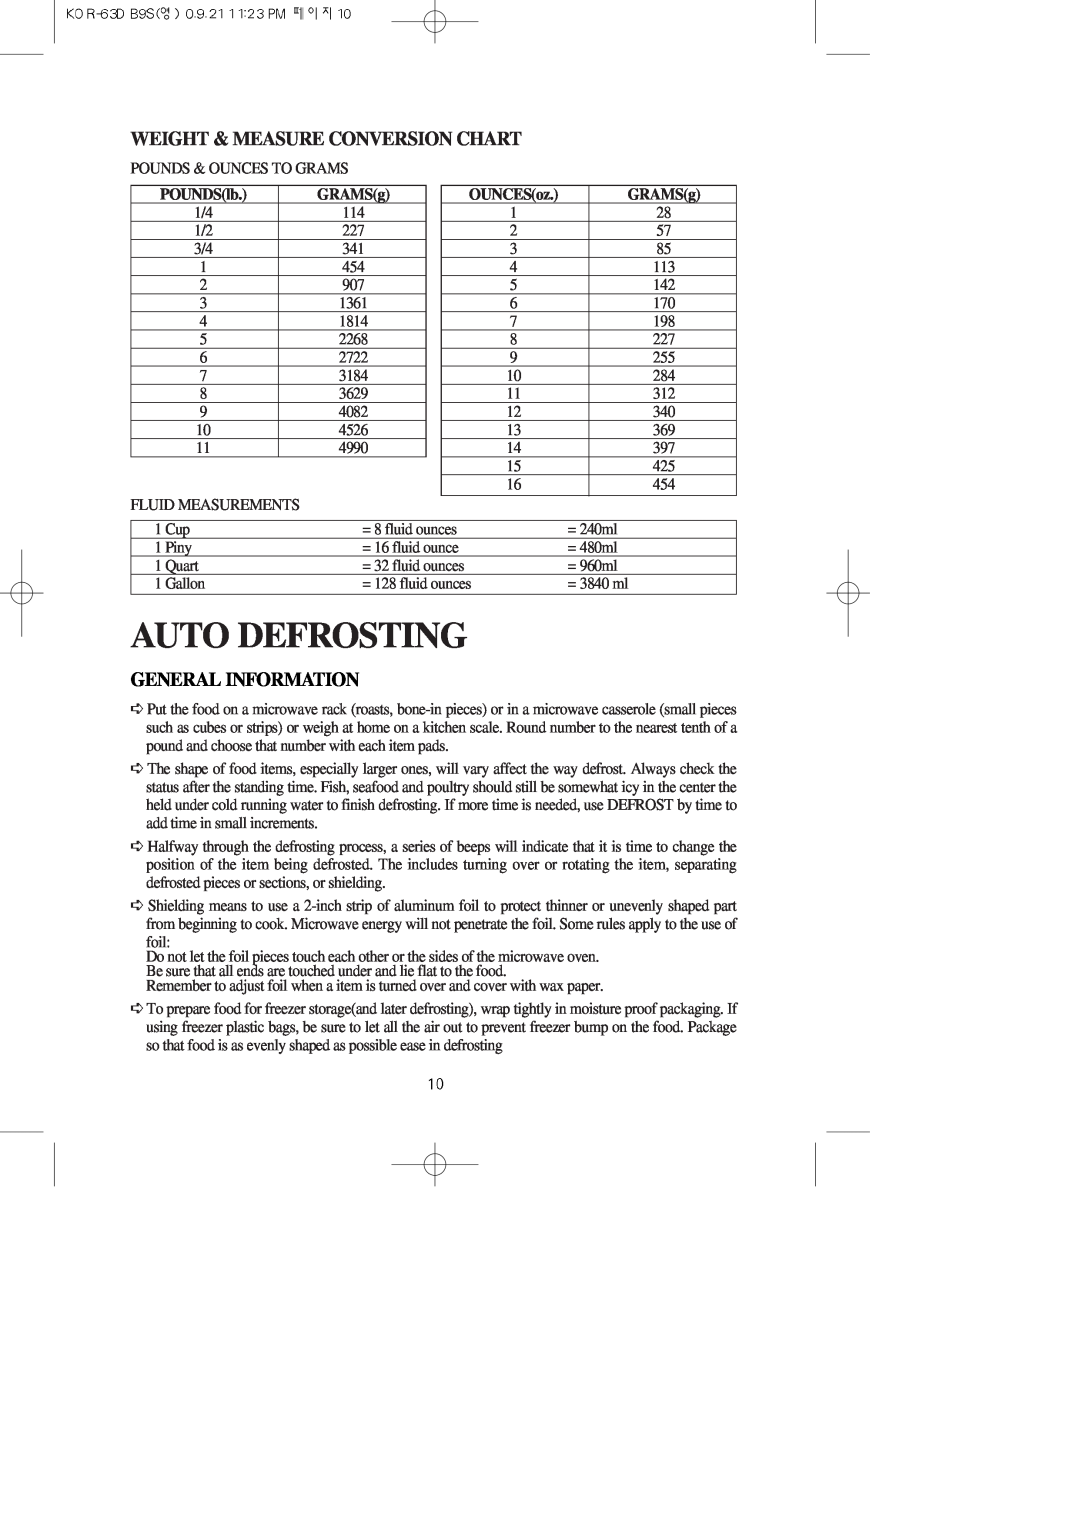 Daewoo KOR-63DB9S Auto Defrosting, Weight & Measure Conversion Chart, General Information, POUNDSlb, GRAMSg, OUNCESoz 